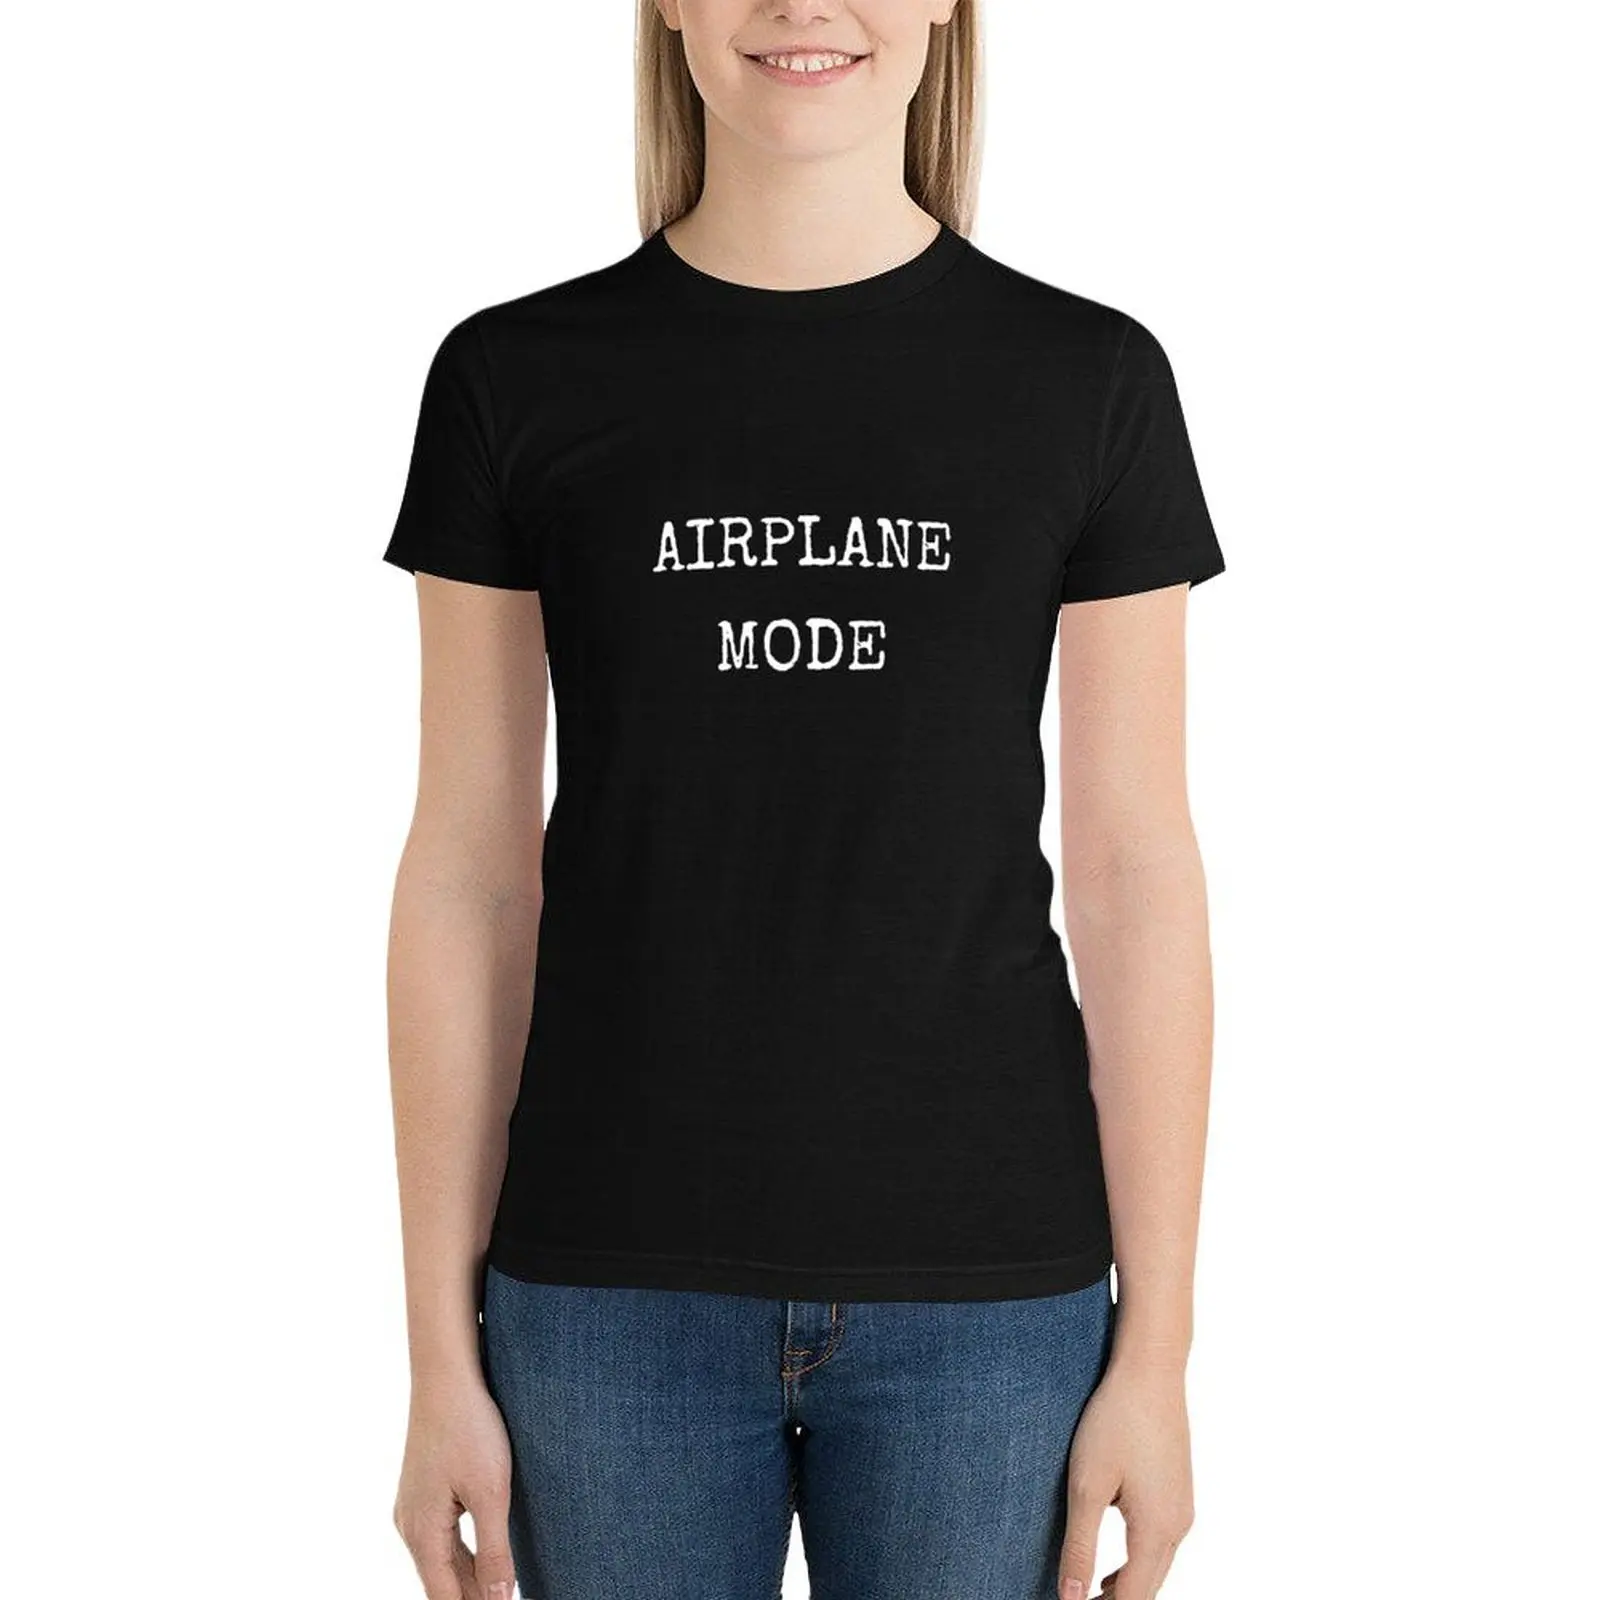 

Airplane Mode T-Shirt tees vintage clothes white t-shirts for Women